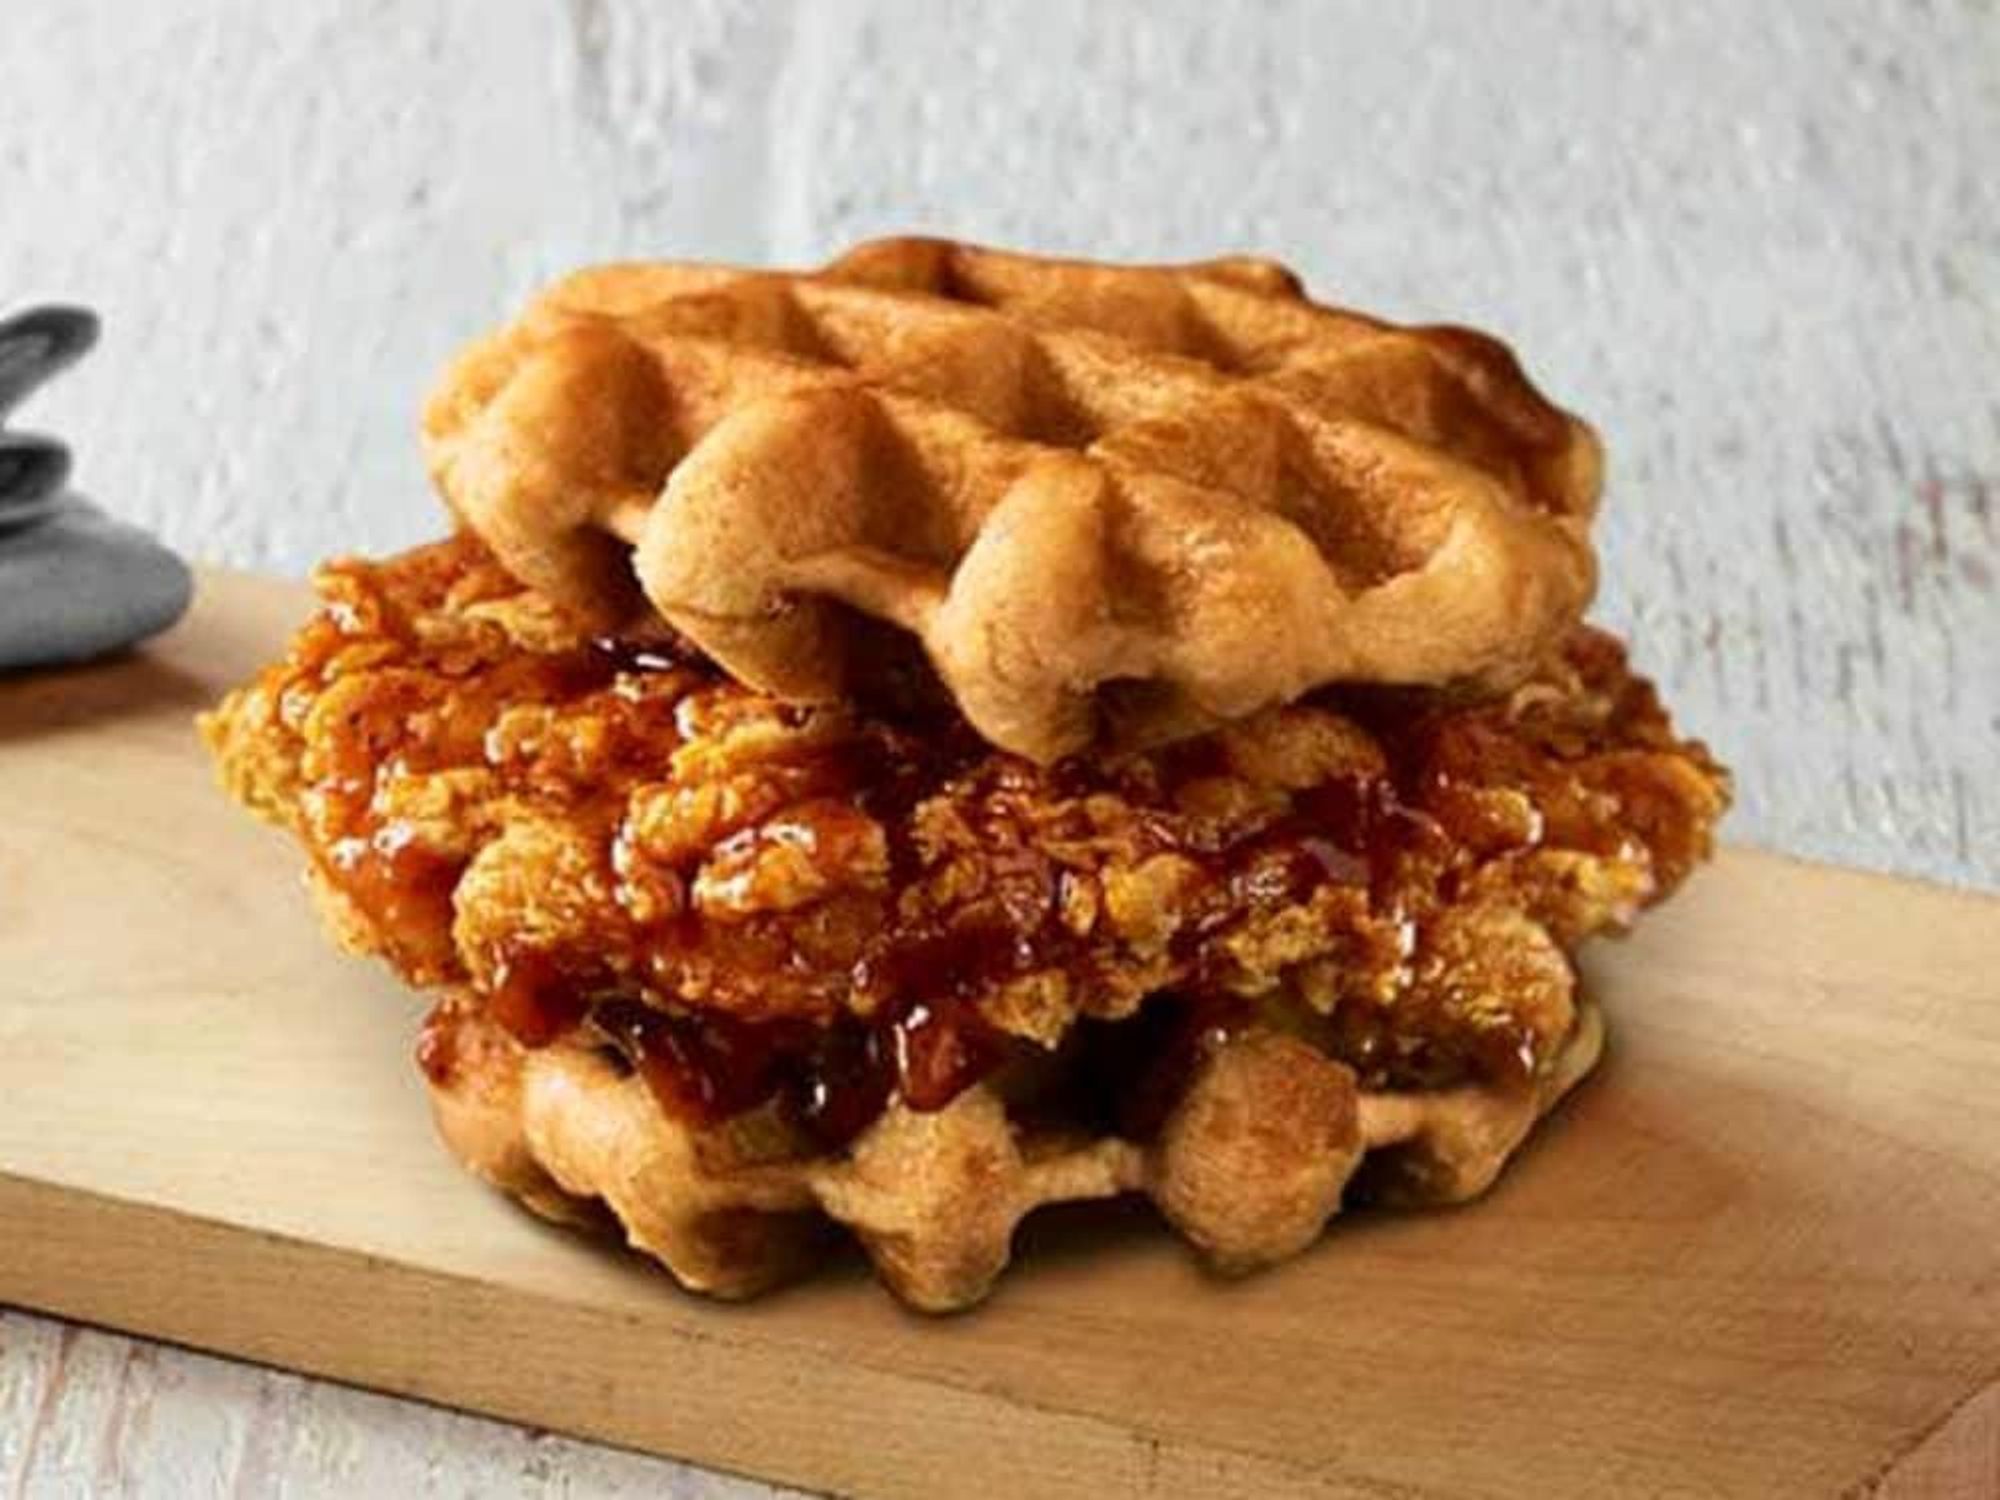 KFC's sweet and savory Chicken & Waffles Sandwich makes for a tall